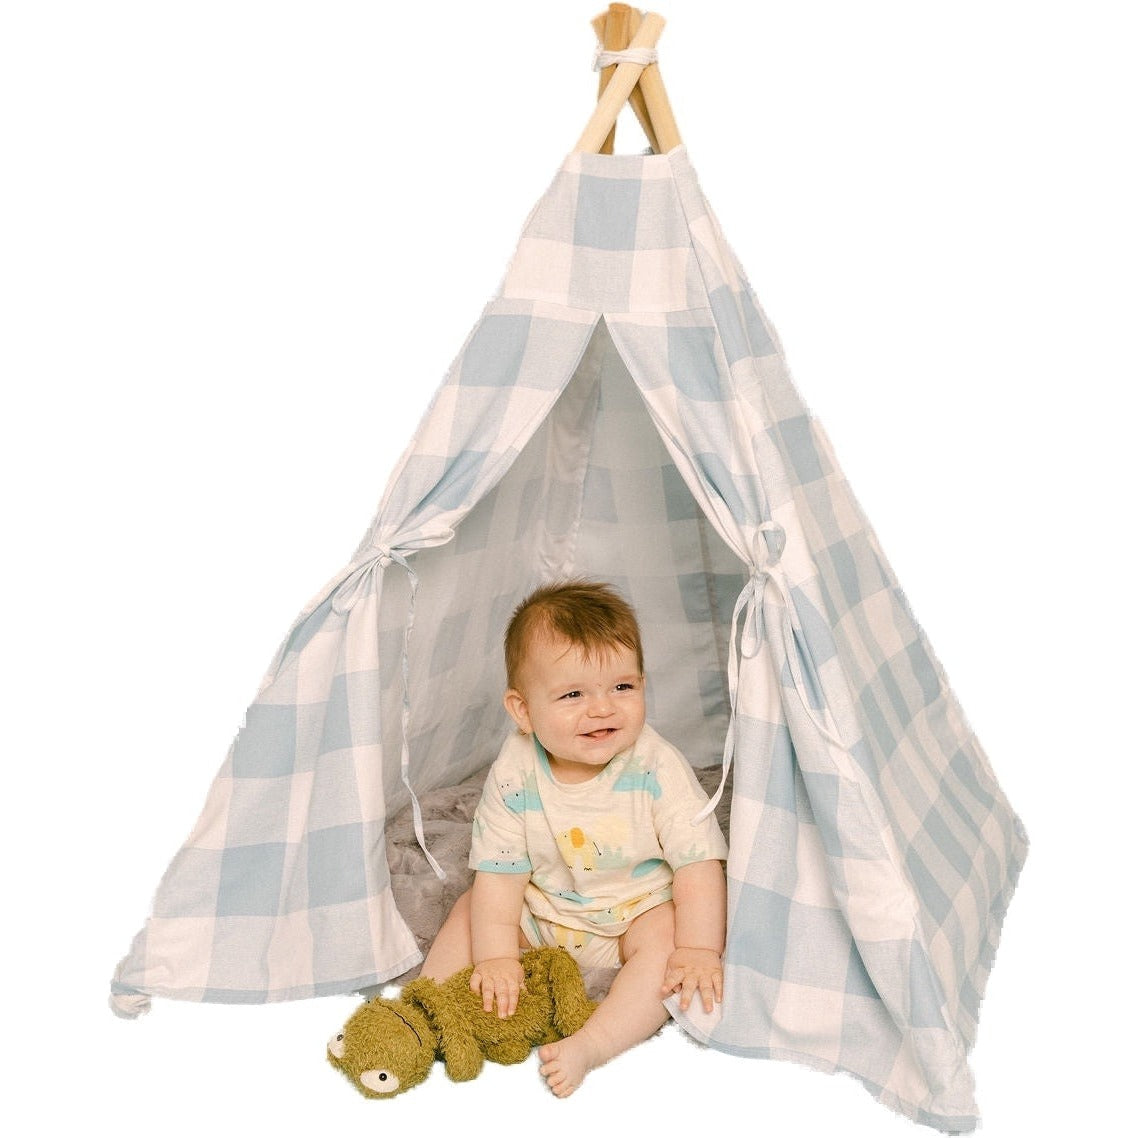 The Charles Itty Bitty Play Tent